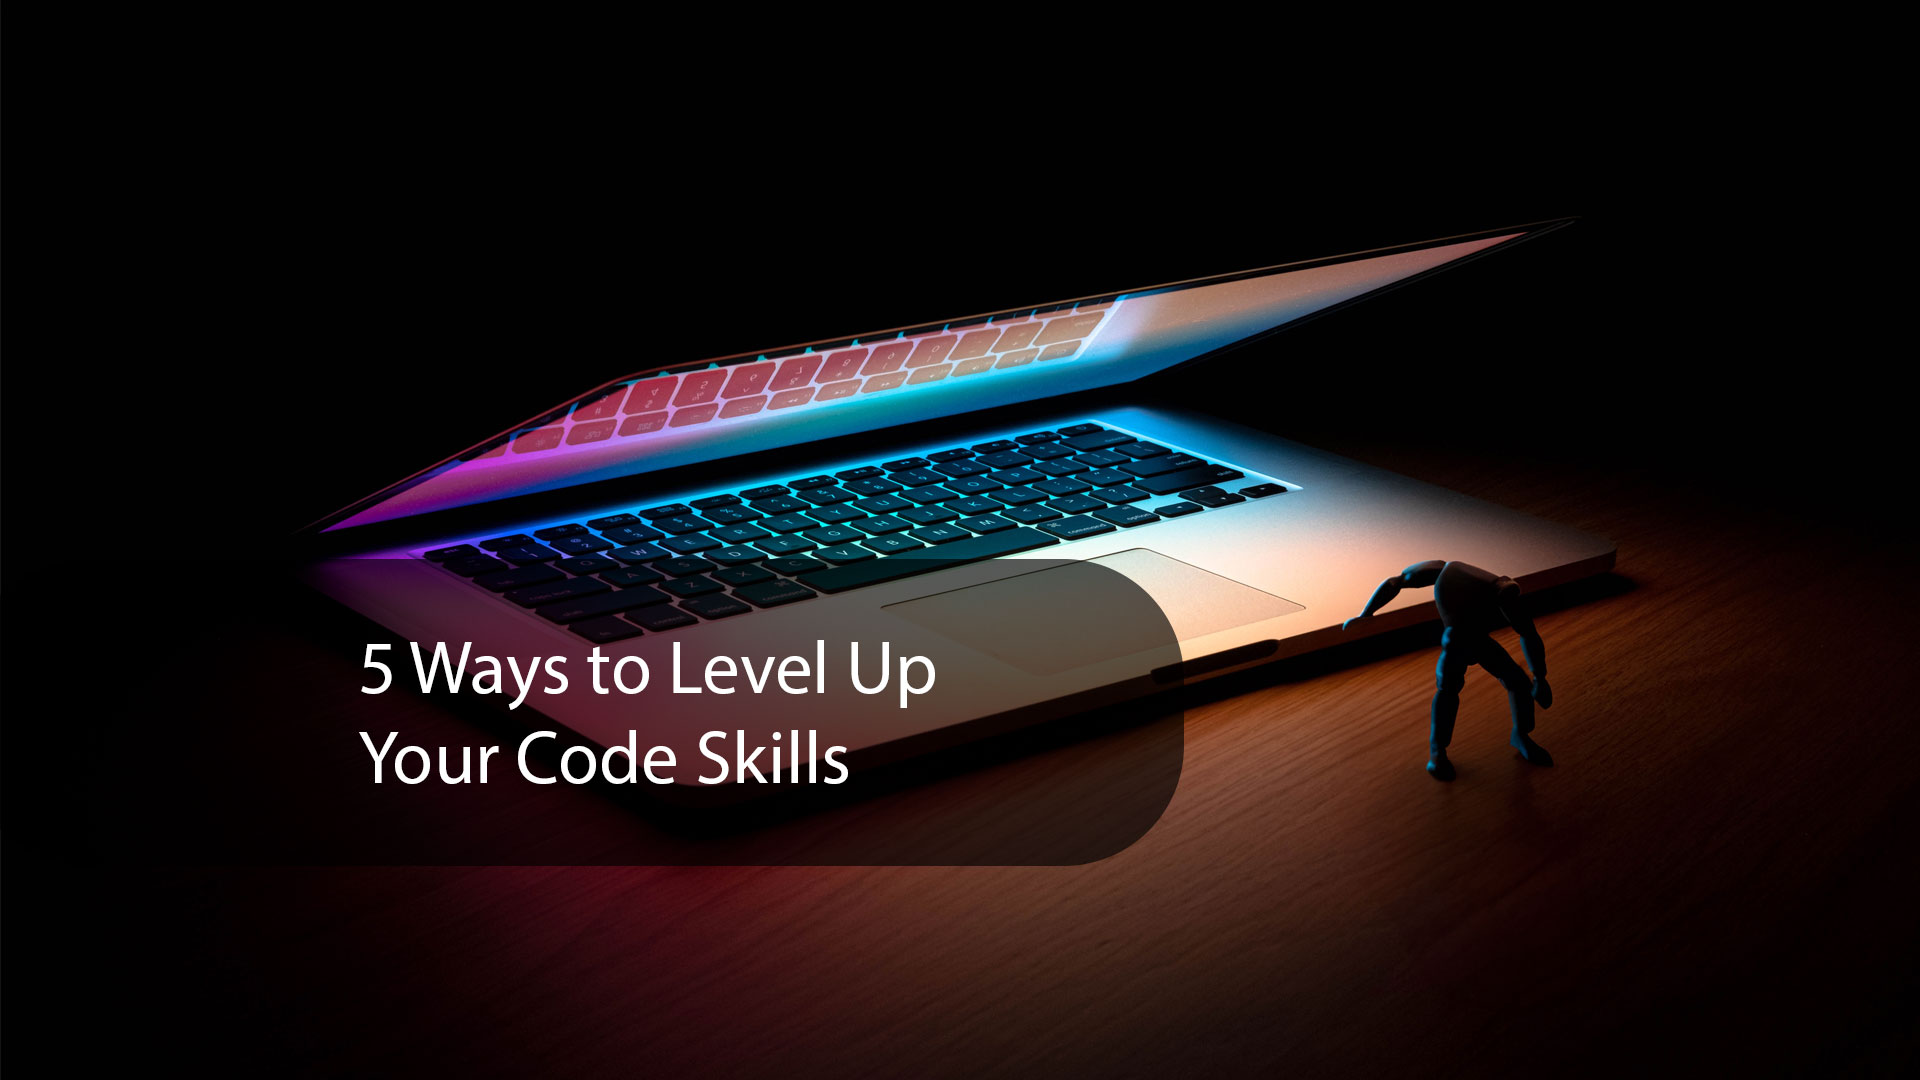 5 Ways to Level Up Your Code Skills